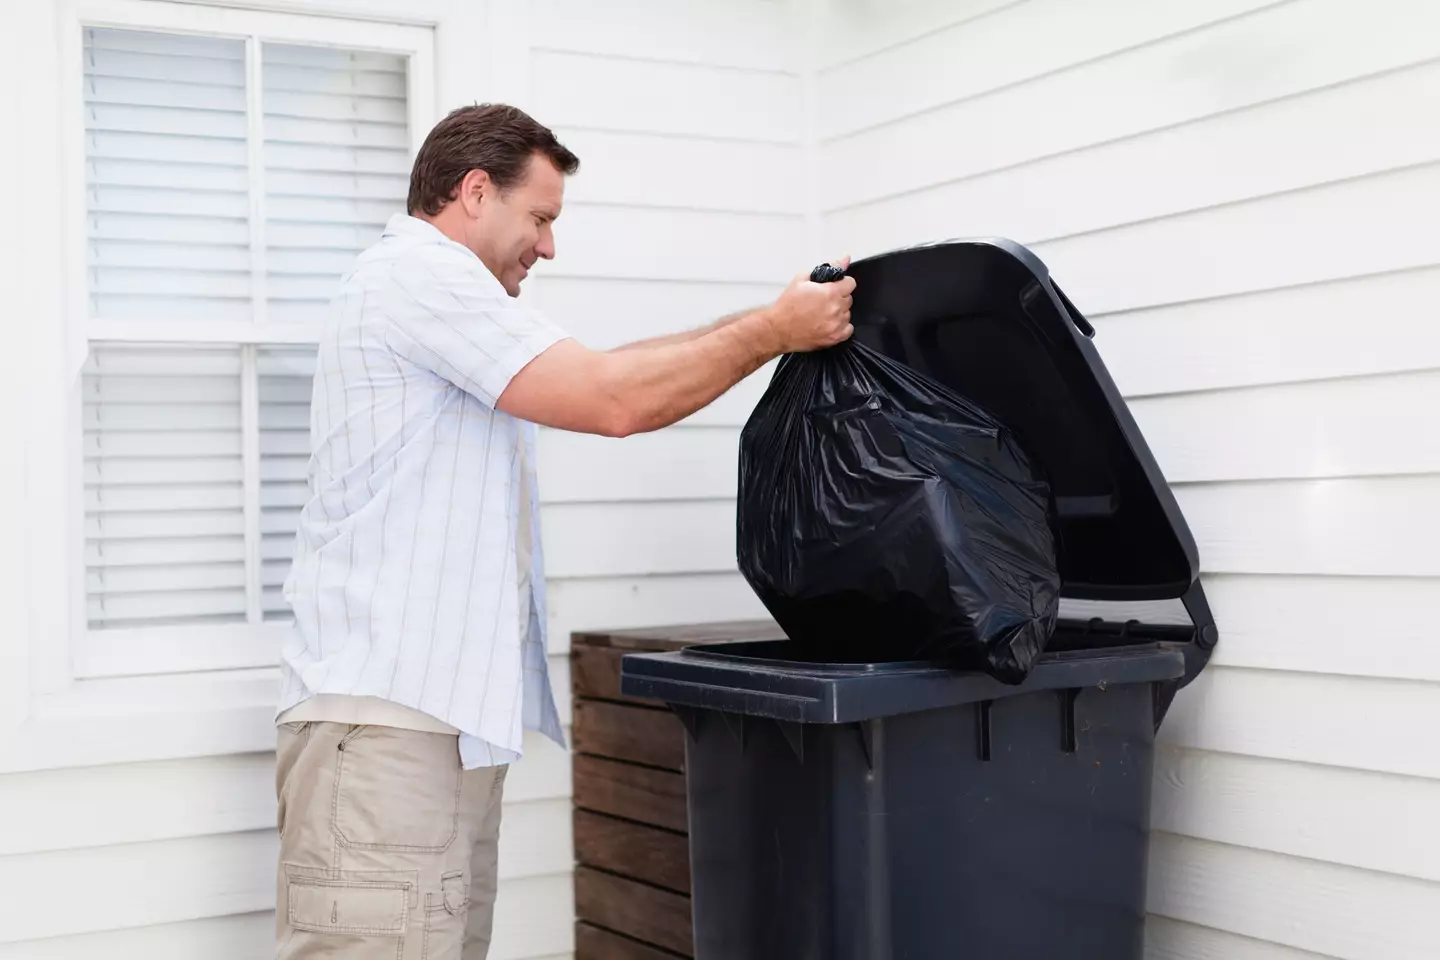 One woman said the trash is the only chore her husband does without being prompted. (